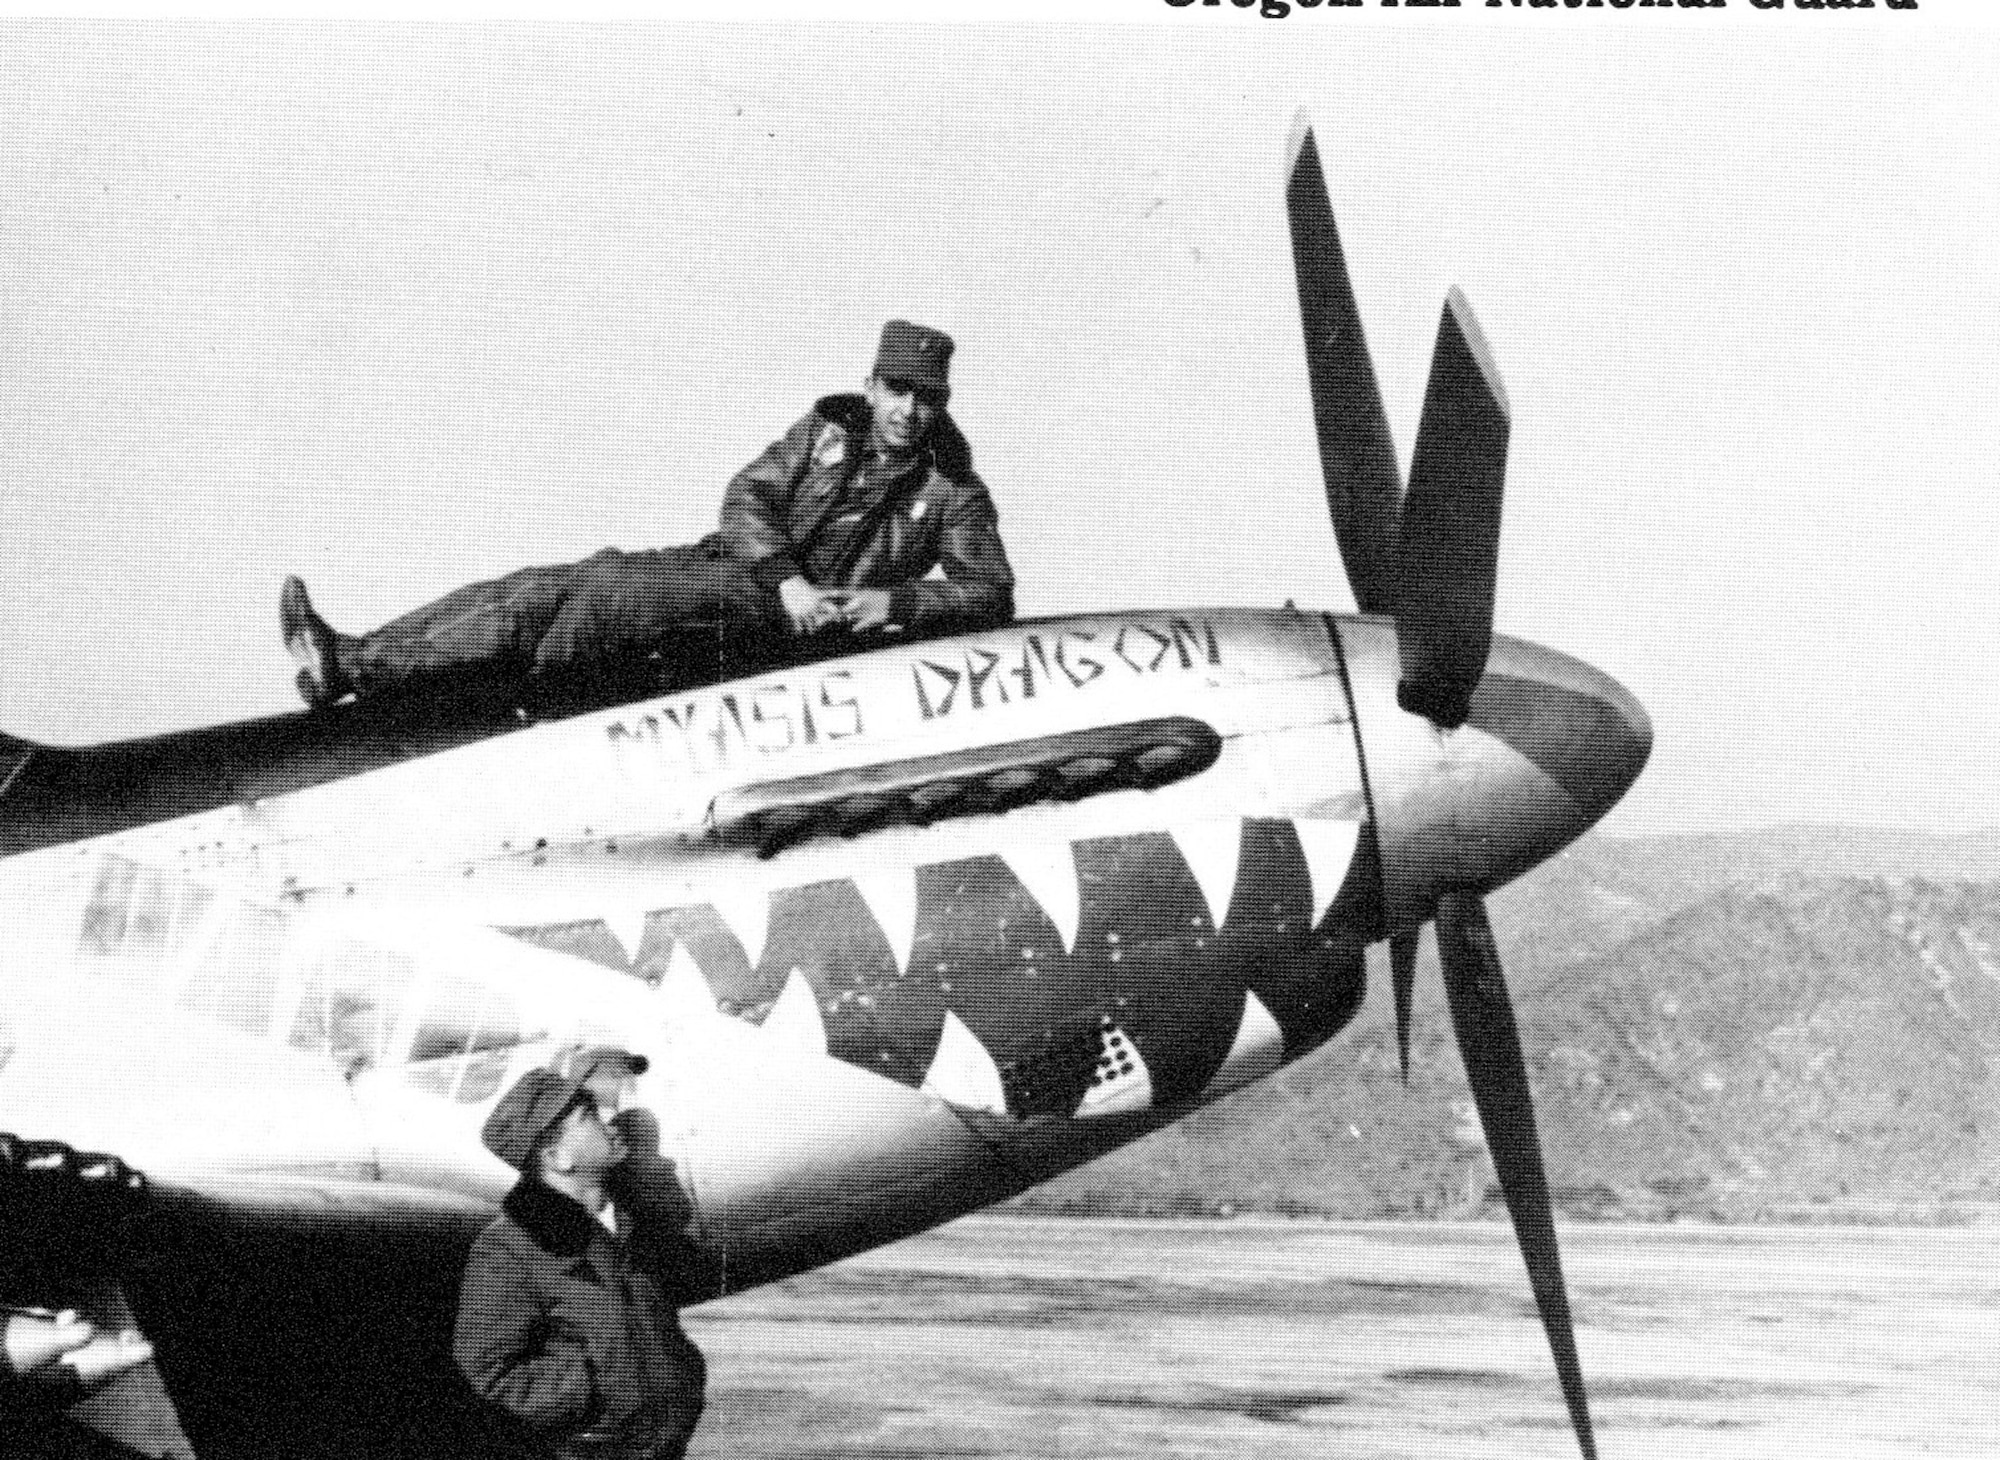 Ore ANG pilot Ernest Wakehouse strikes a leisurely pose atop the nose of a Mustang in Korea during a break in operations.  But combat flying wasn’t  leisurely at all and the name on the plane, ”Myasis Dragon,” described how he felt at times during his combat tour.  Another F-51 pilot, possibly Wallace Parks, looks on.